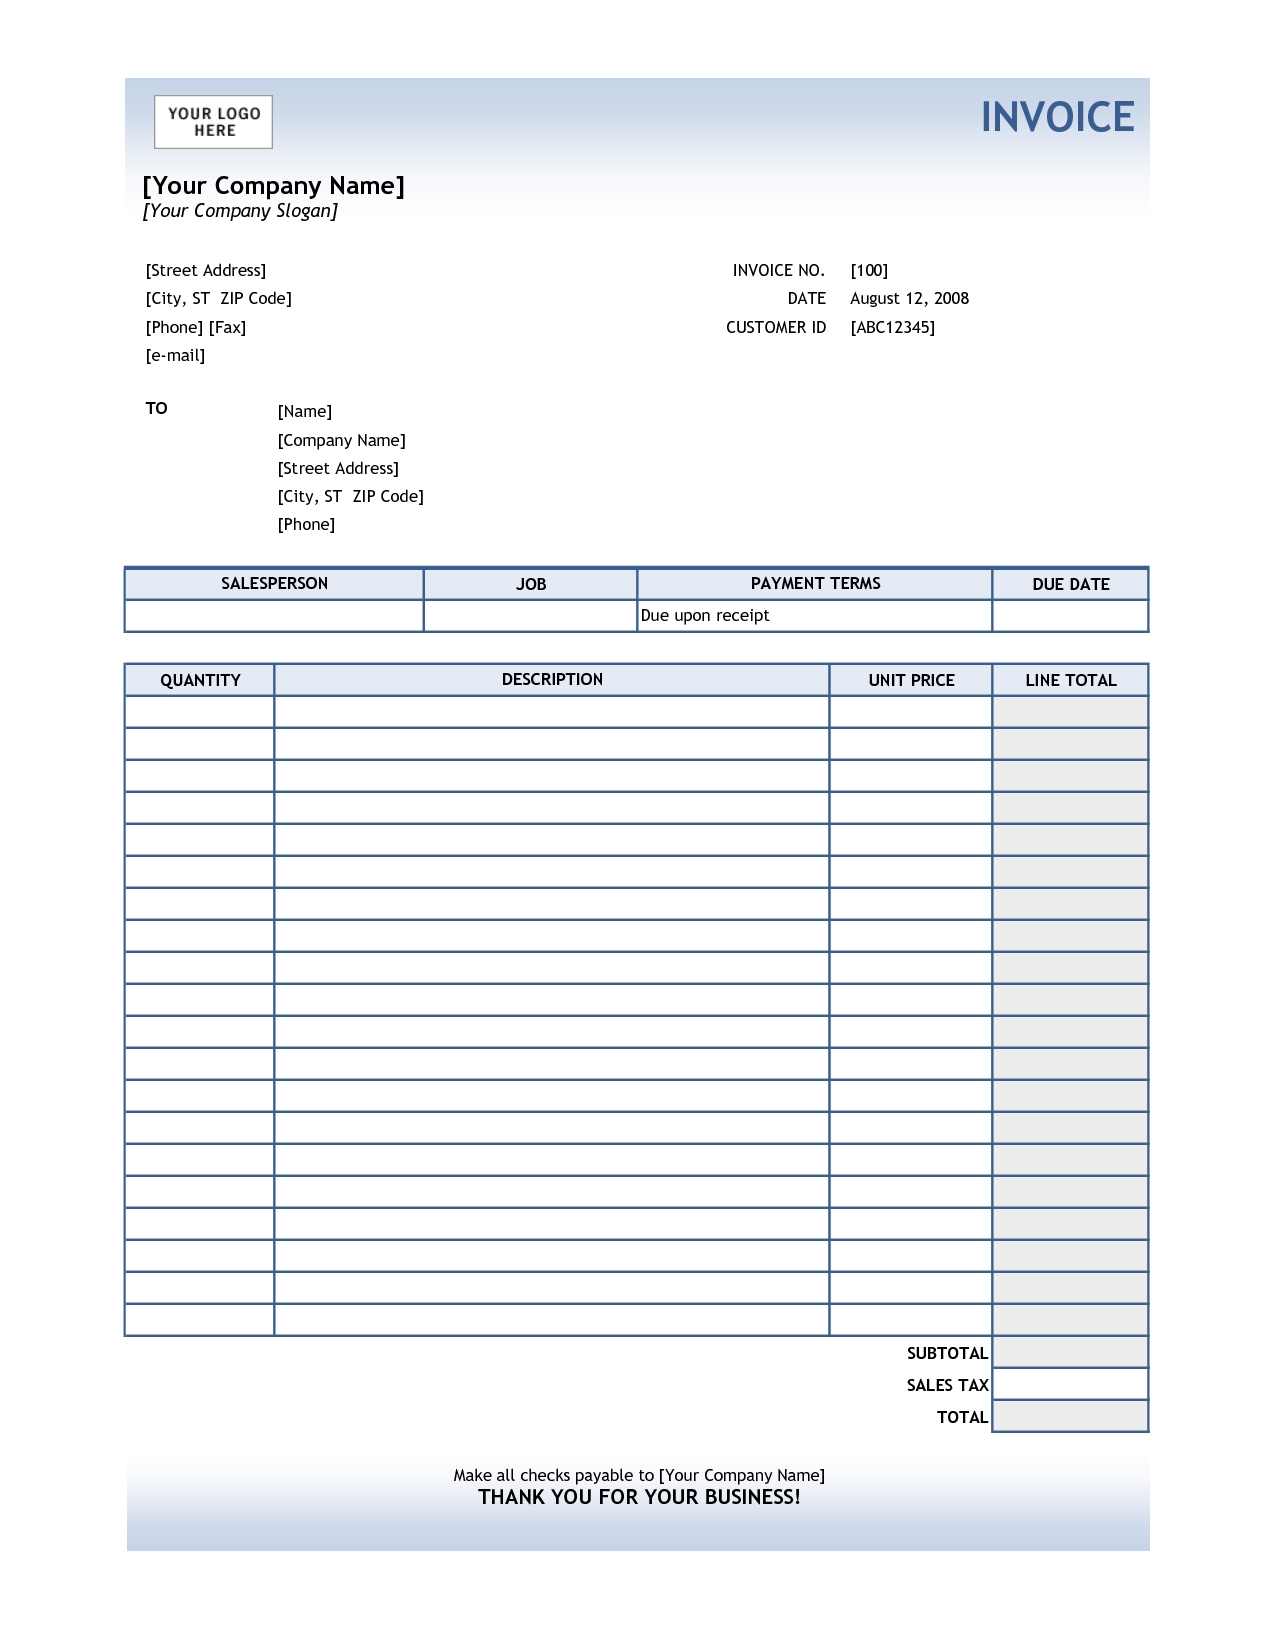 16 best photos of invoice format in excel excel service invoice excel invoice format